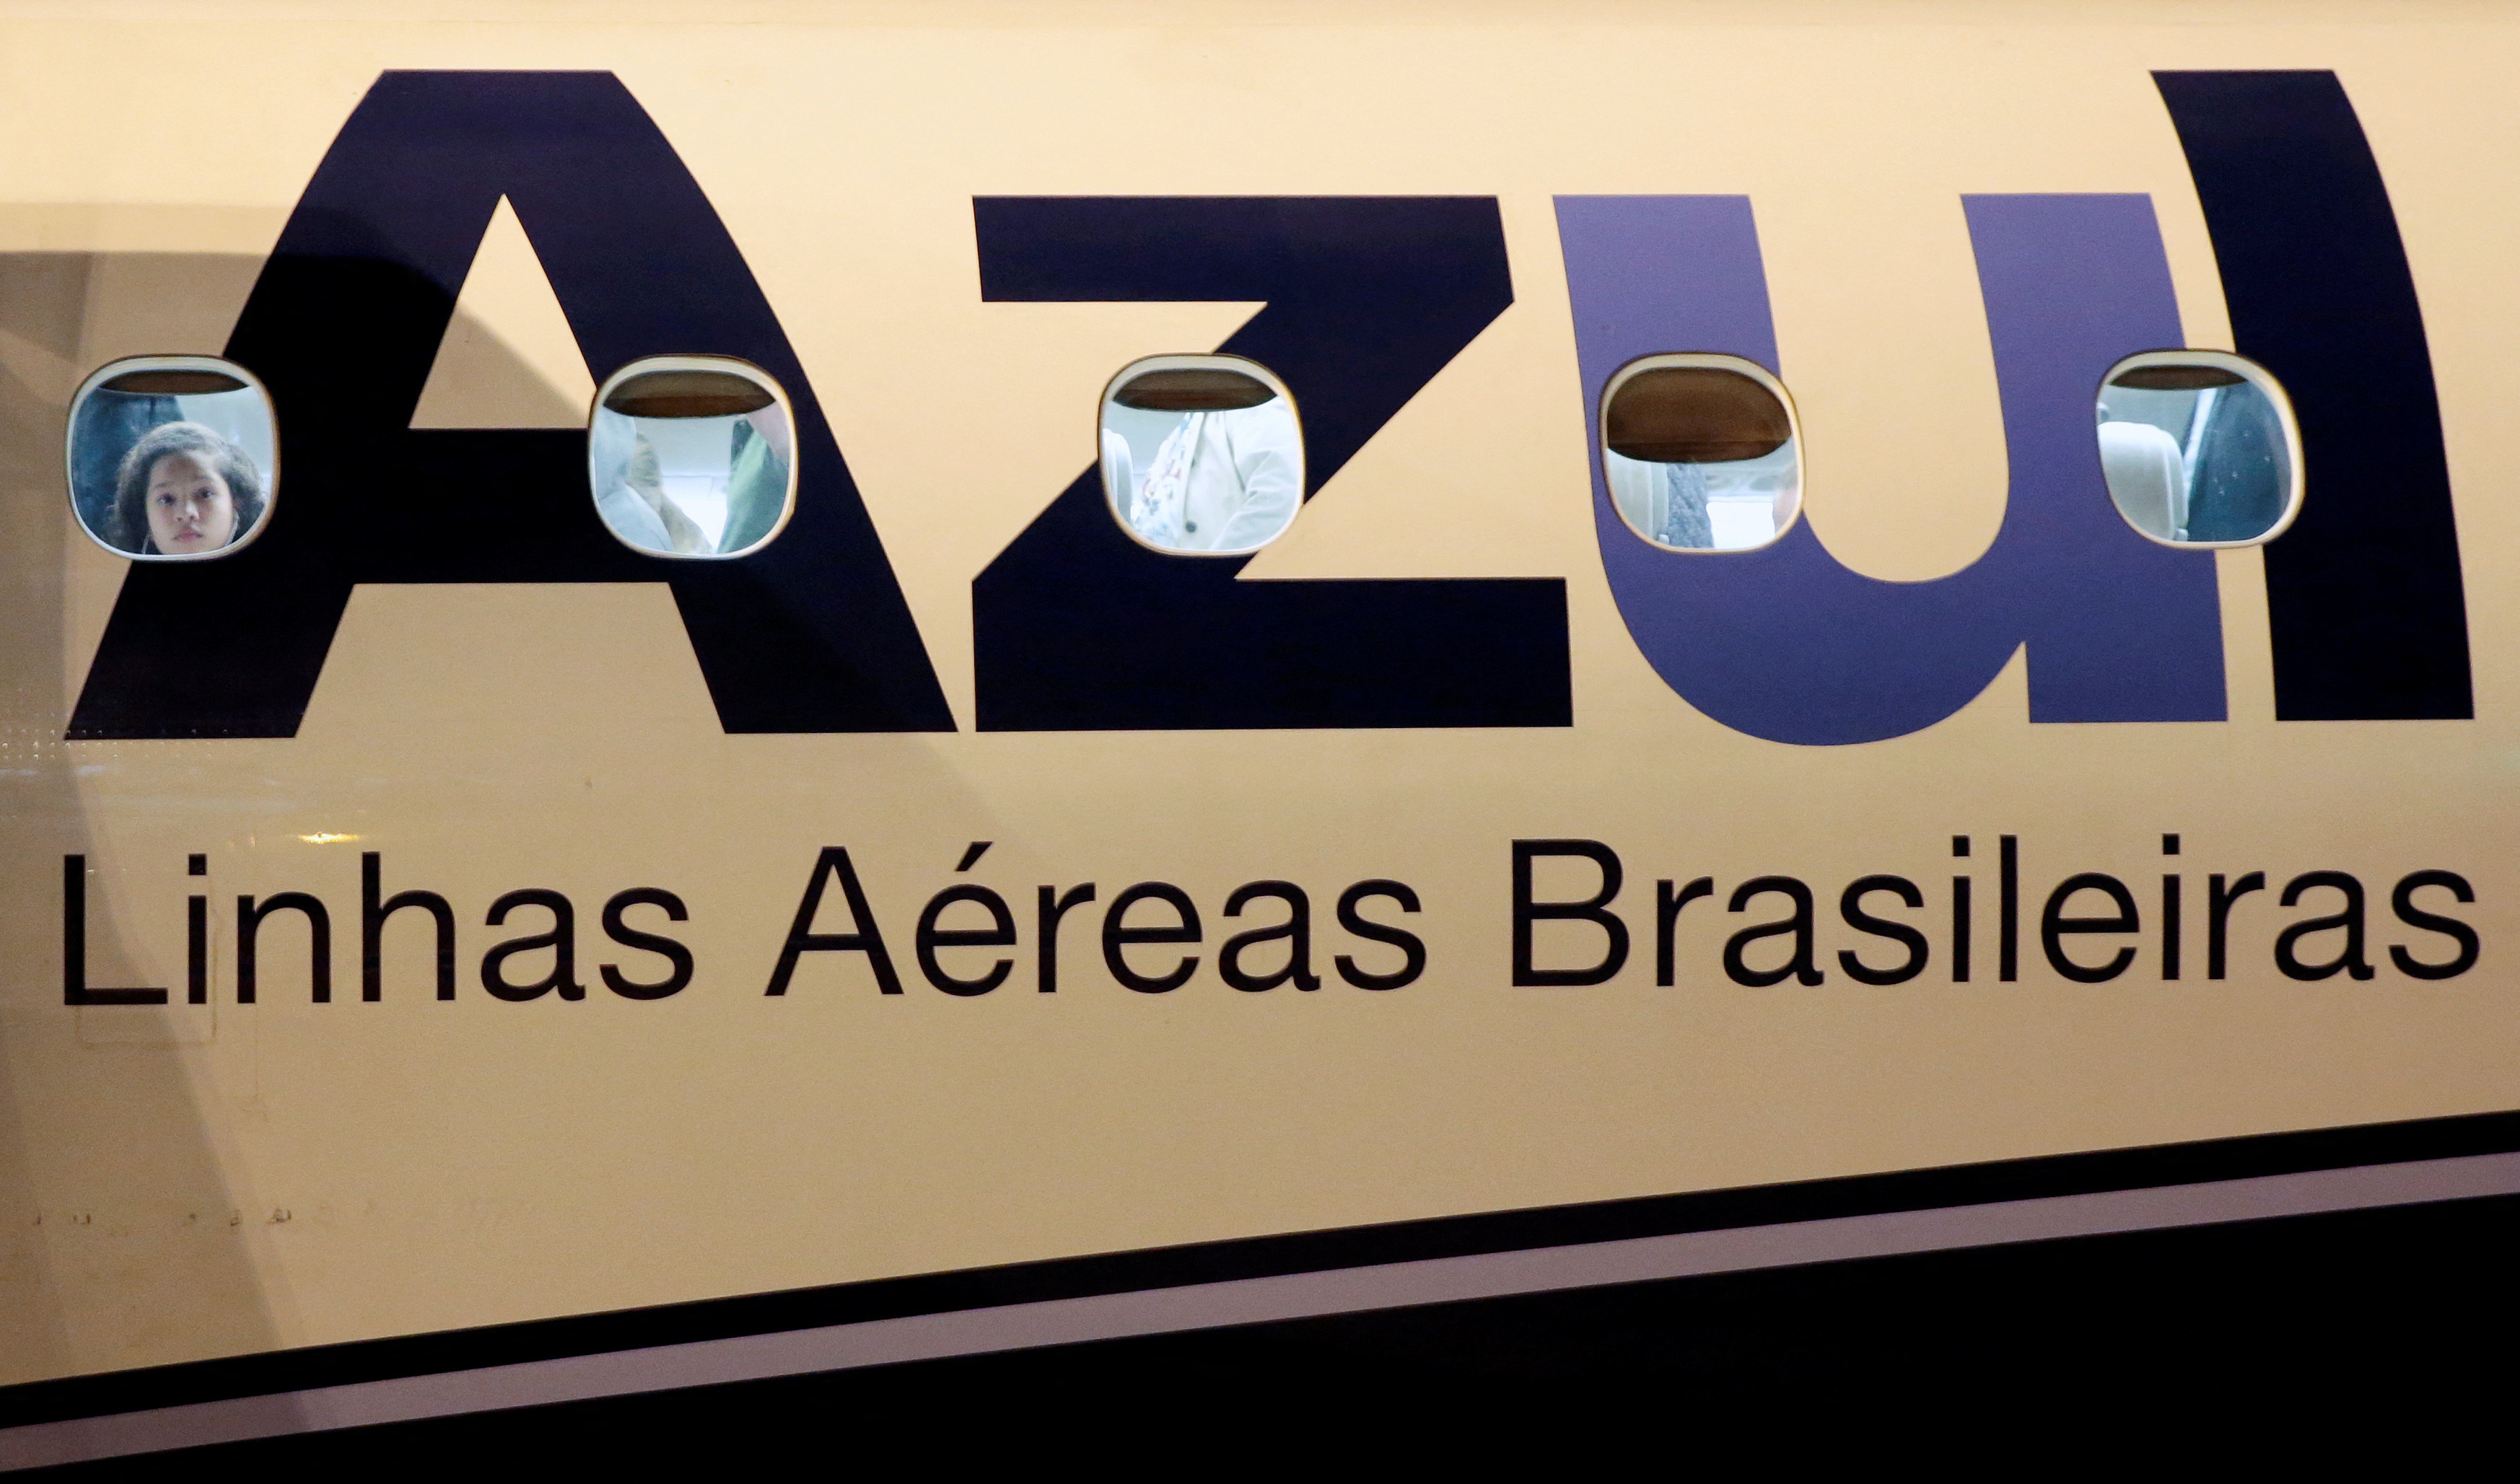 A logo of Azul Brazilian Airlines is seen on a plane at International Airport in Guarulhos